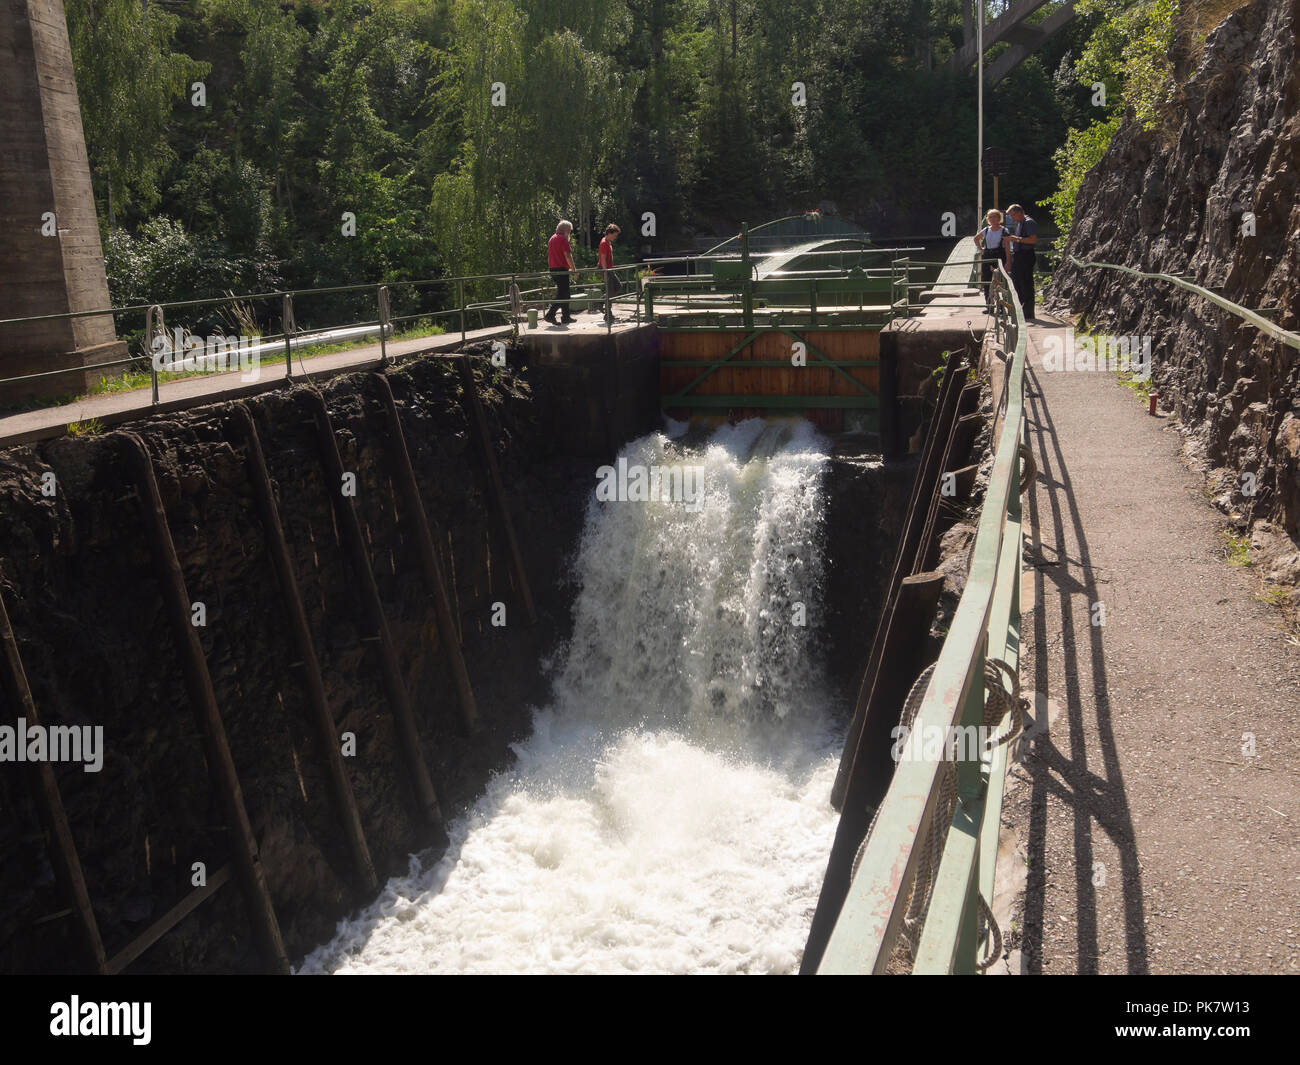 Håverud in Dalsland province Sweden,where the tourist attraction Dalslands canal passes through locks and an aqueduct, cascading water and tourists Stock Photo